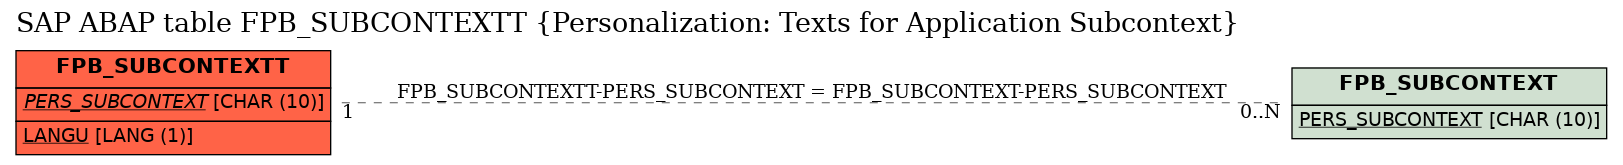 E-R Diagram for table FPB_SUBCONTEXTT (Personalization: Texts for Application Subcontext)